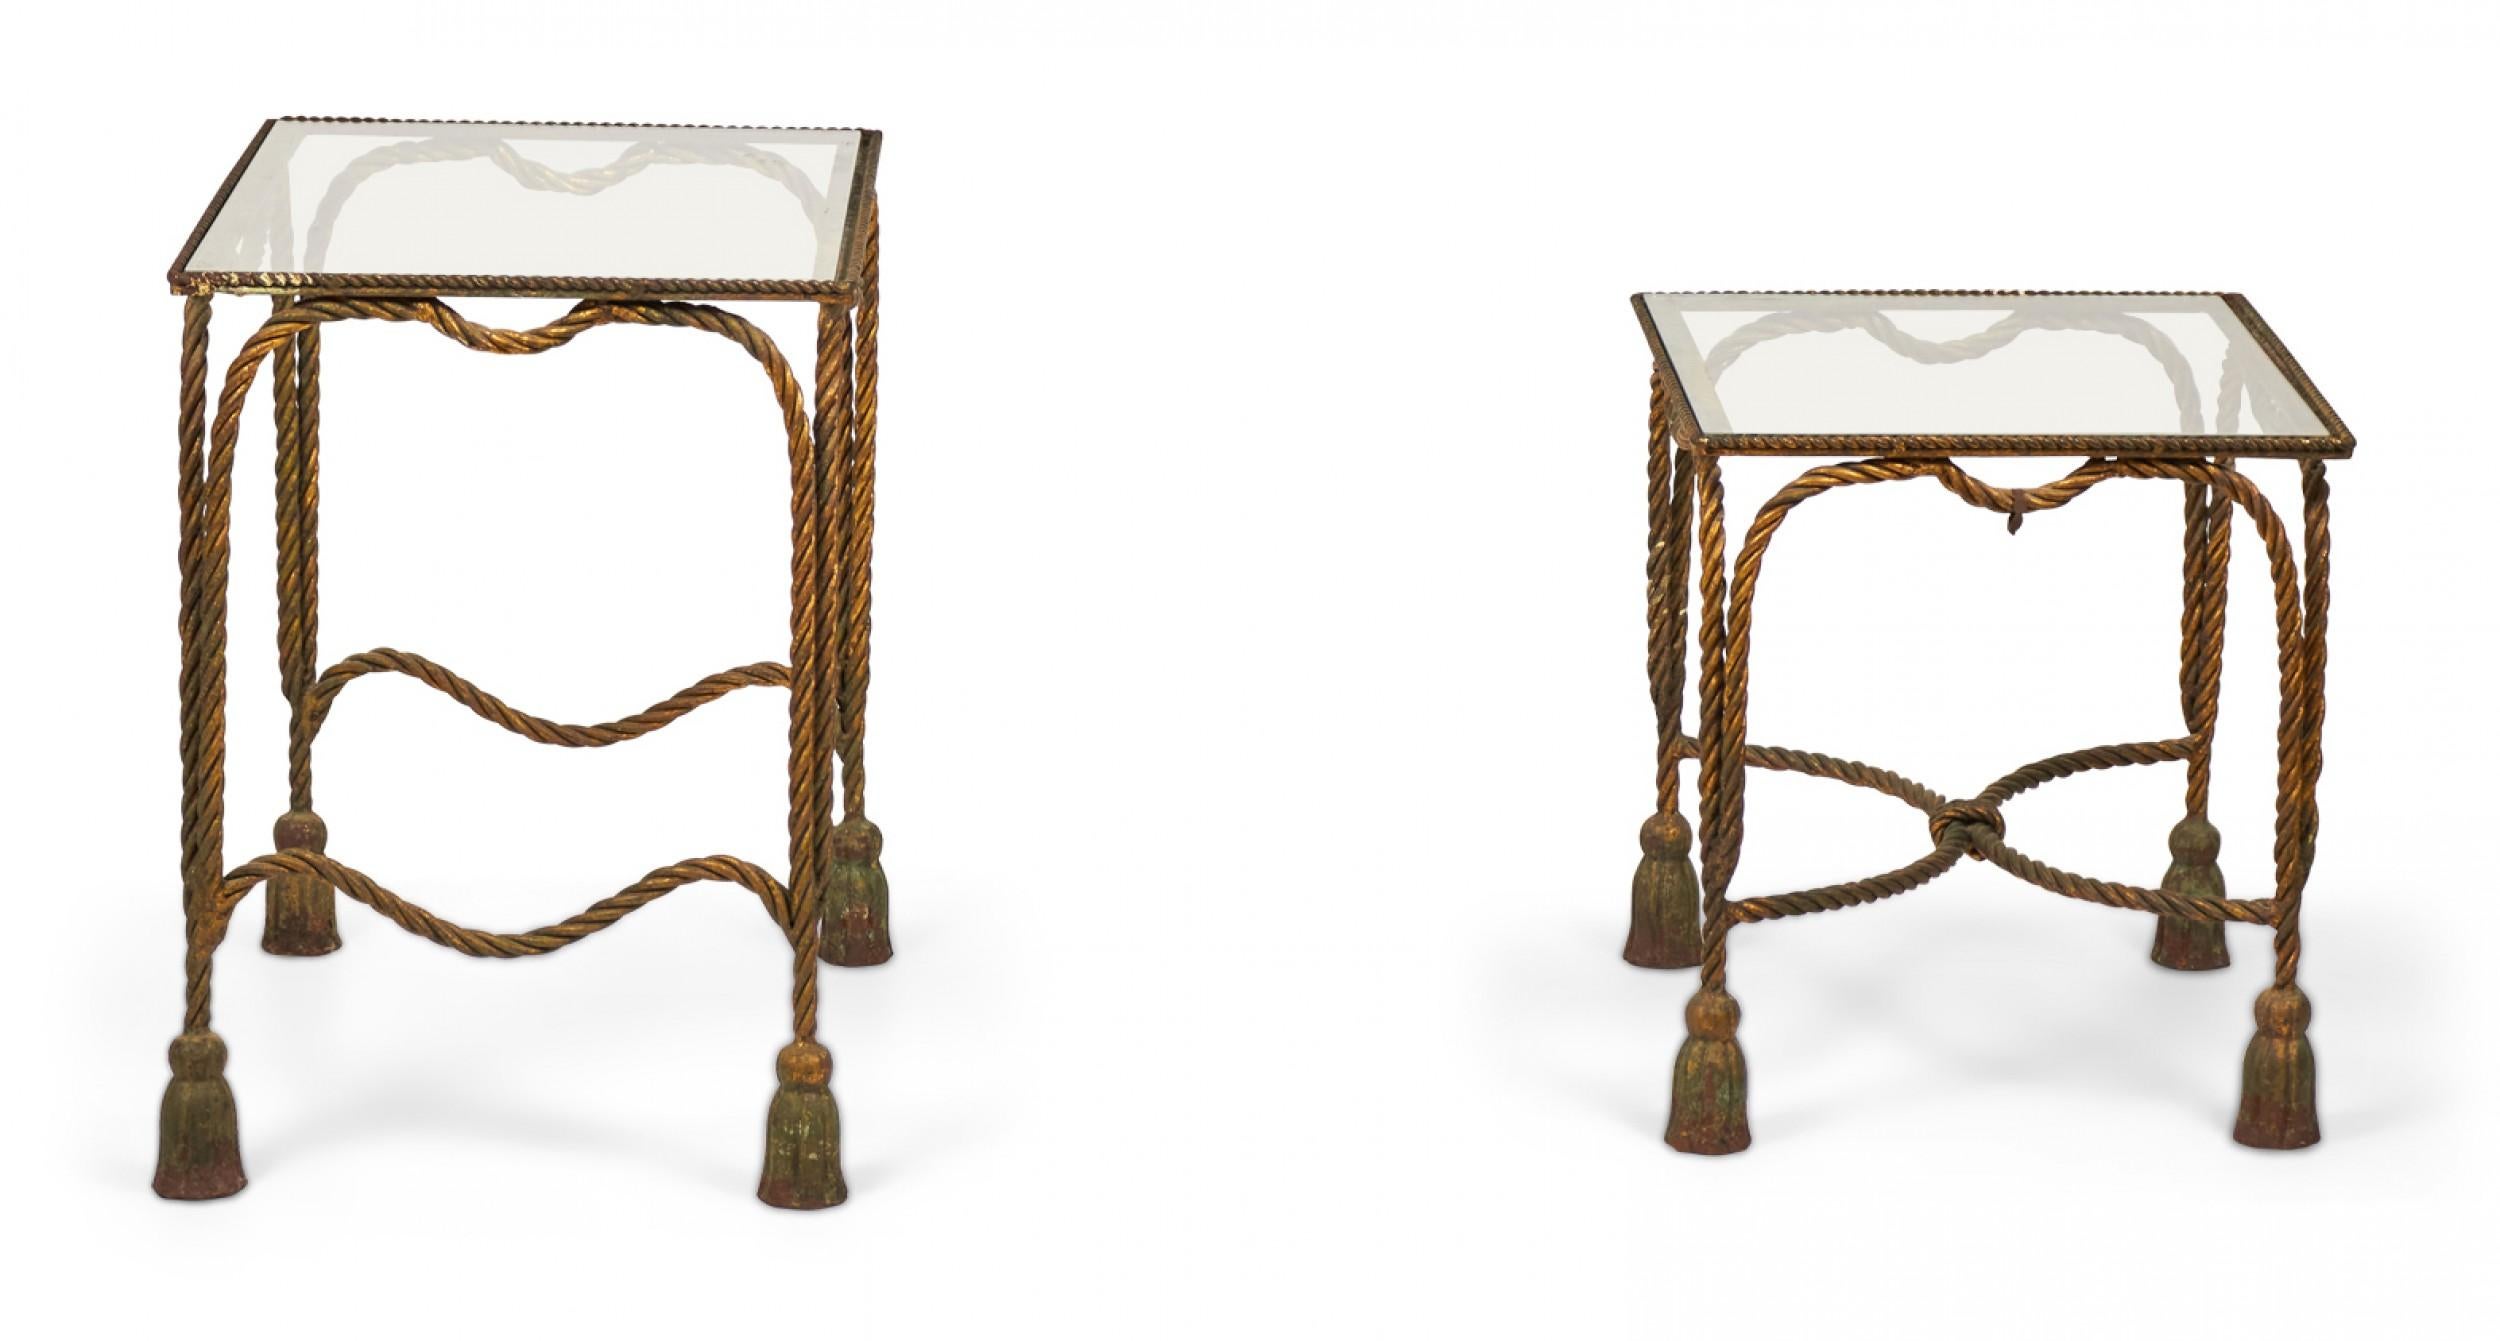 Italian Palladio Italy Baroque Style Rope and Tassel Gilt Iron Nesting Tables For Sale